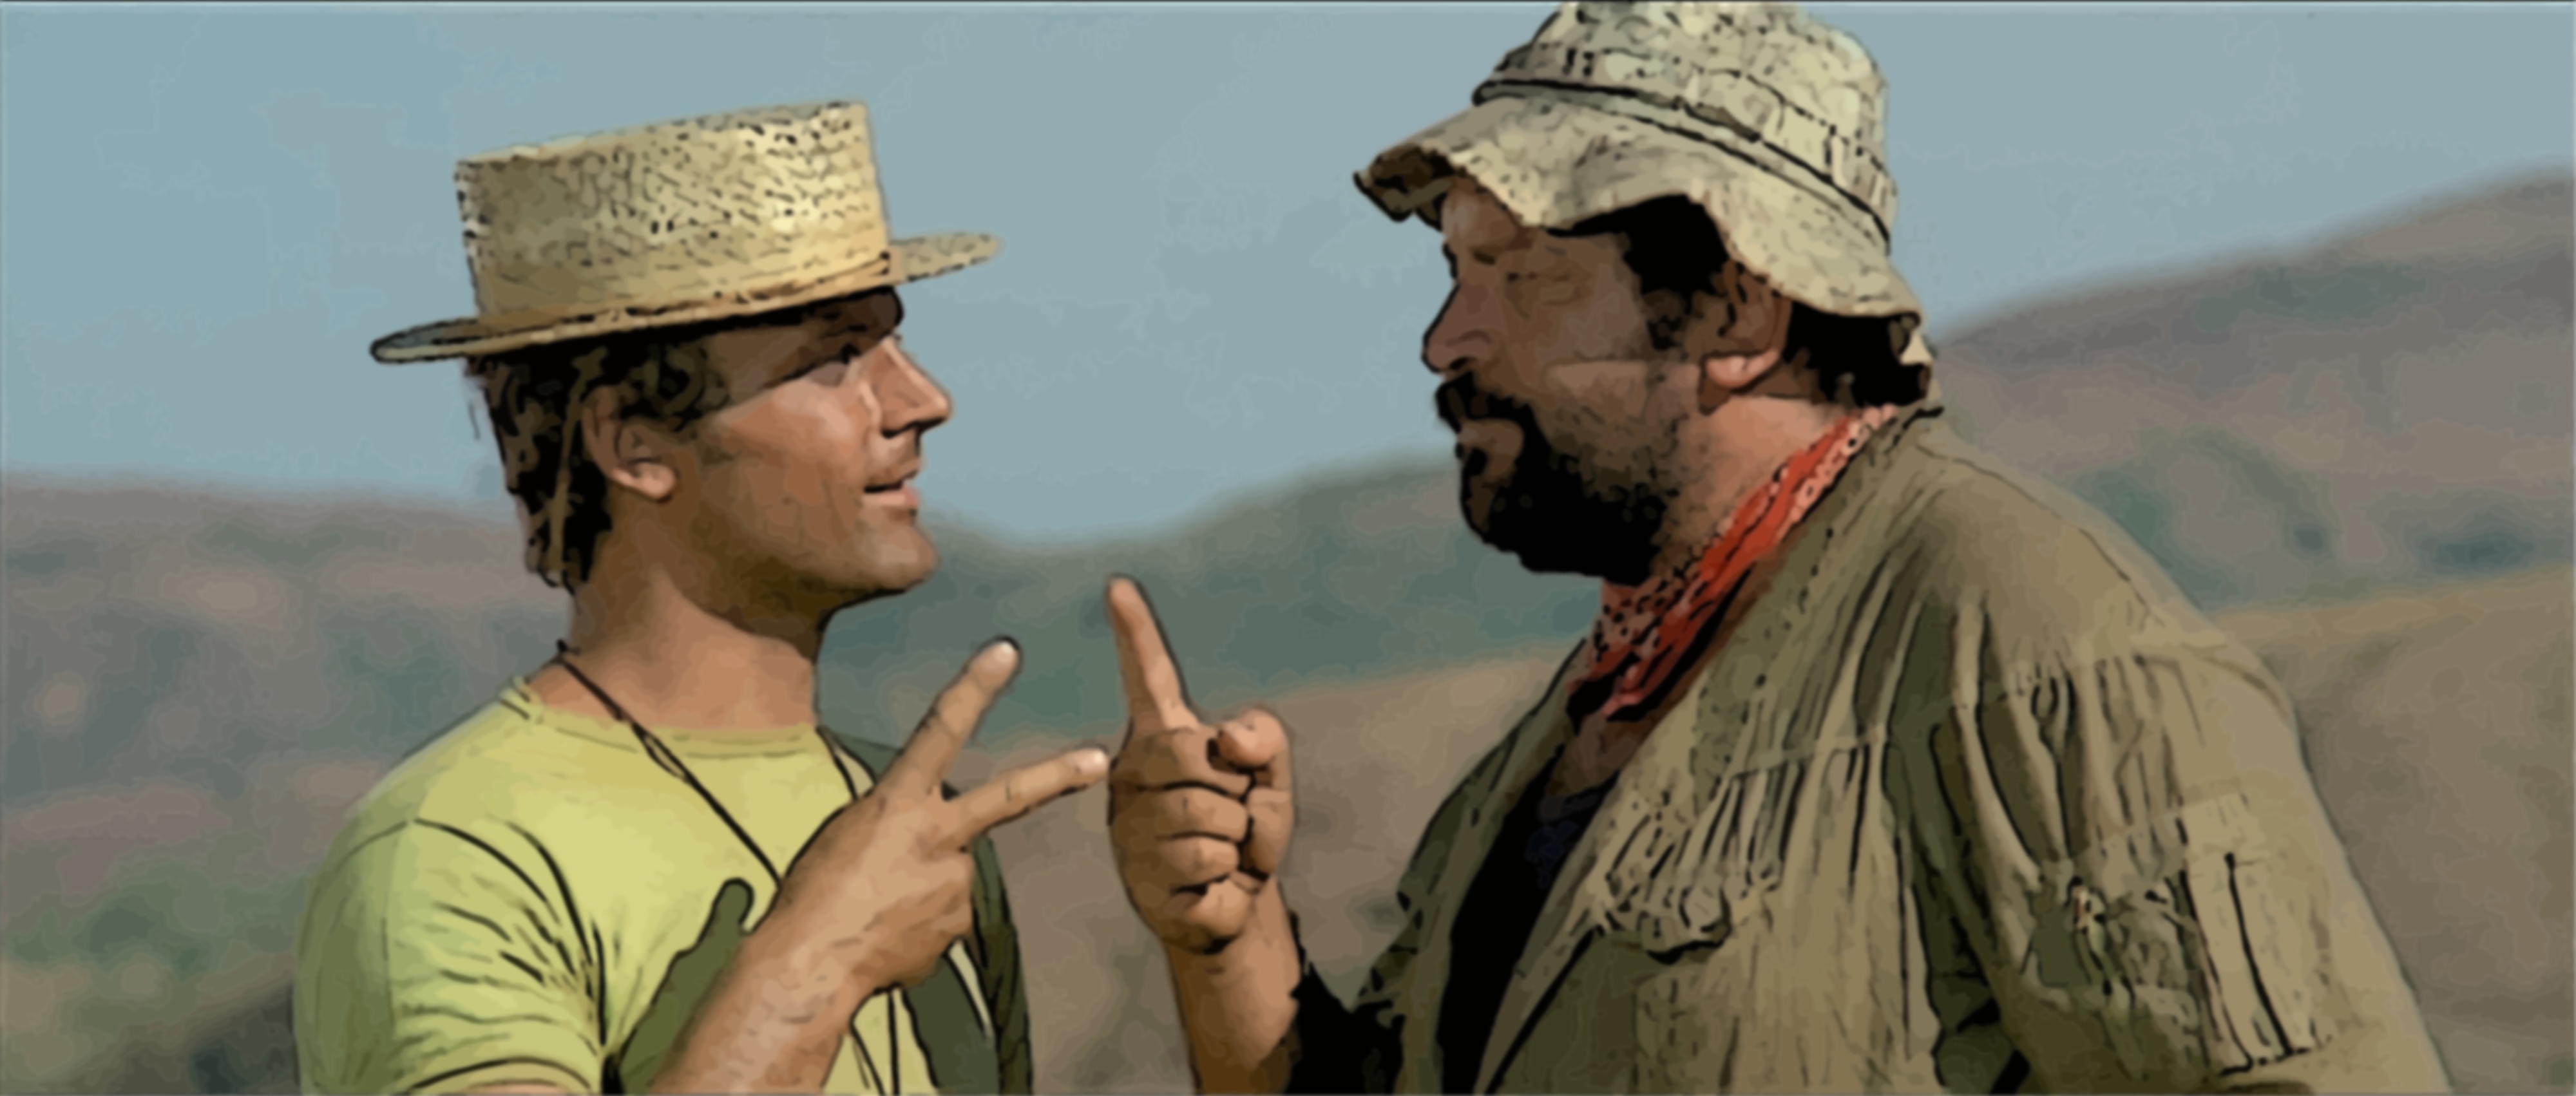 Bud Spencer And Terence Hill Movies English